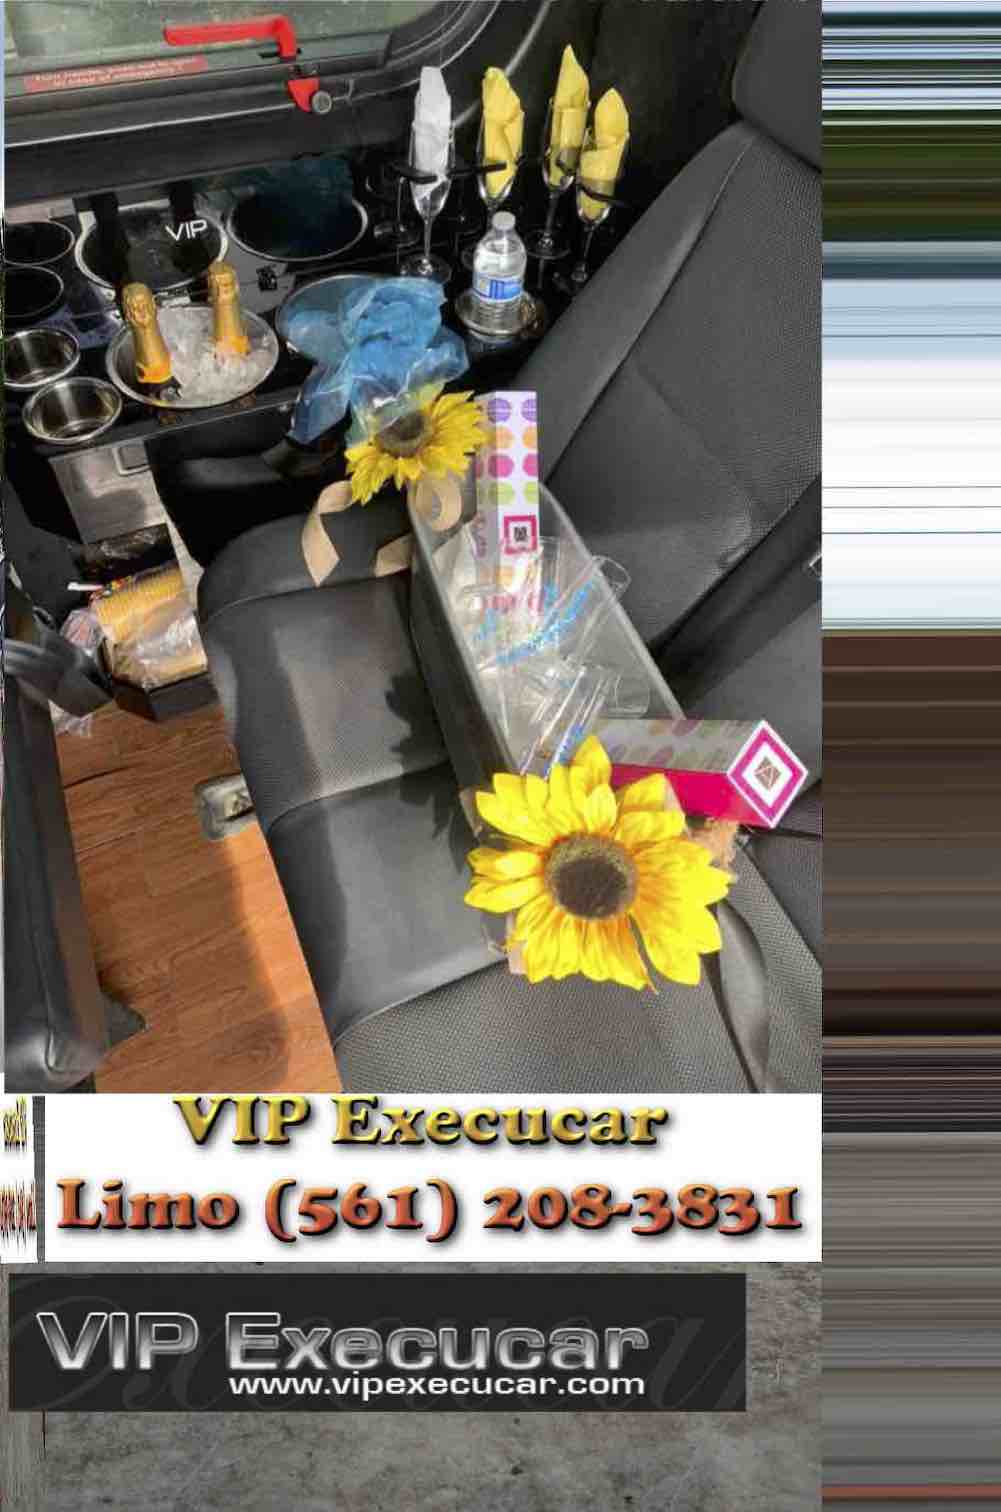 Fort Lauderdale SUV | Sunny Isles Beach Airport limo